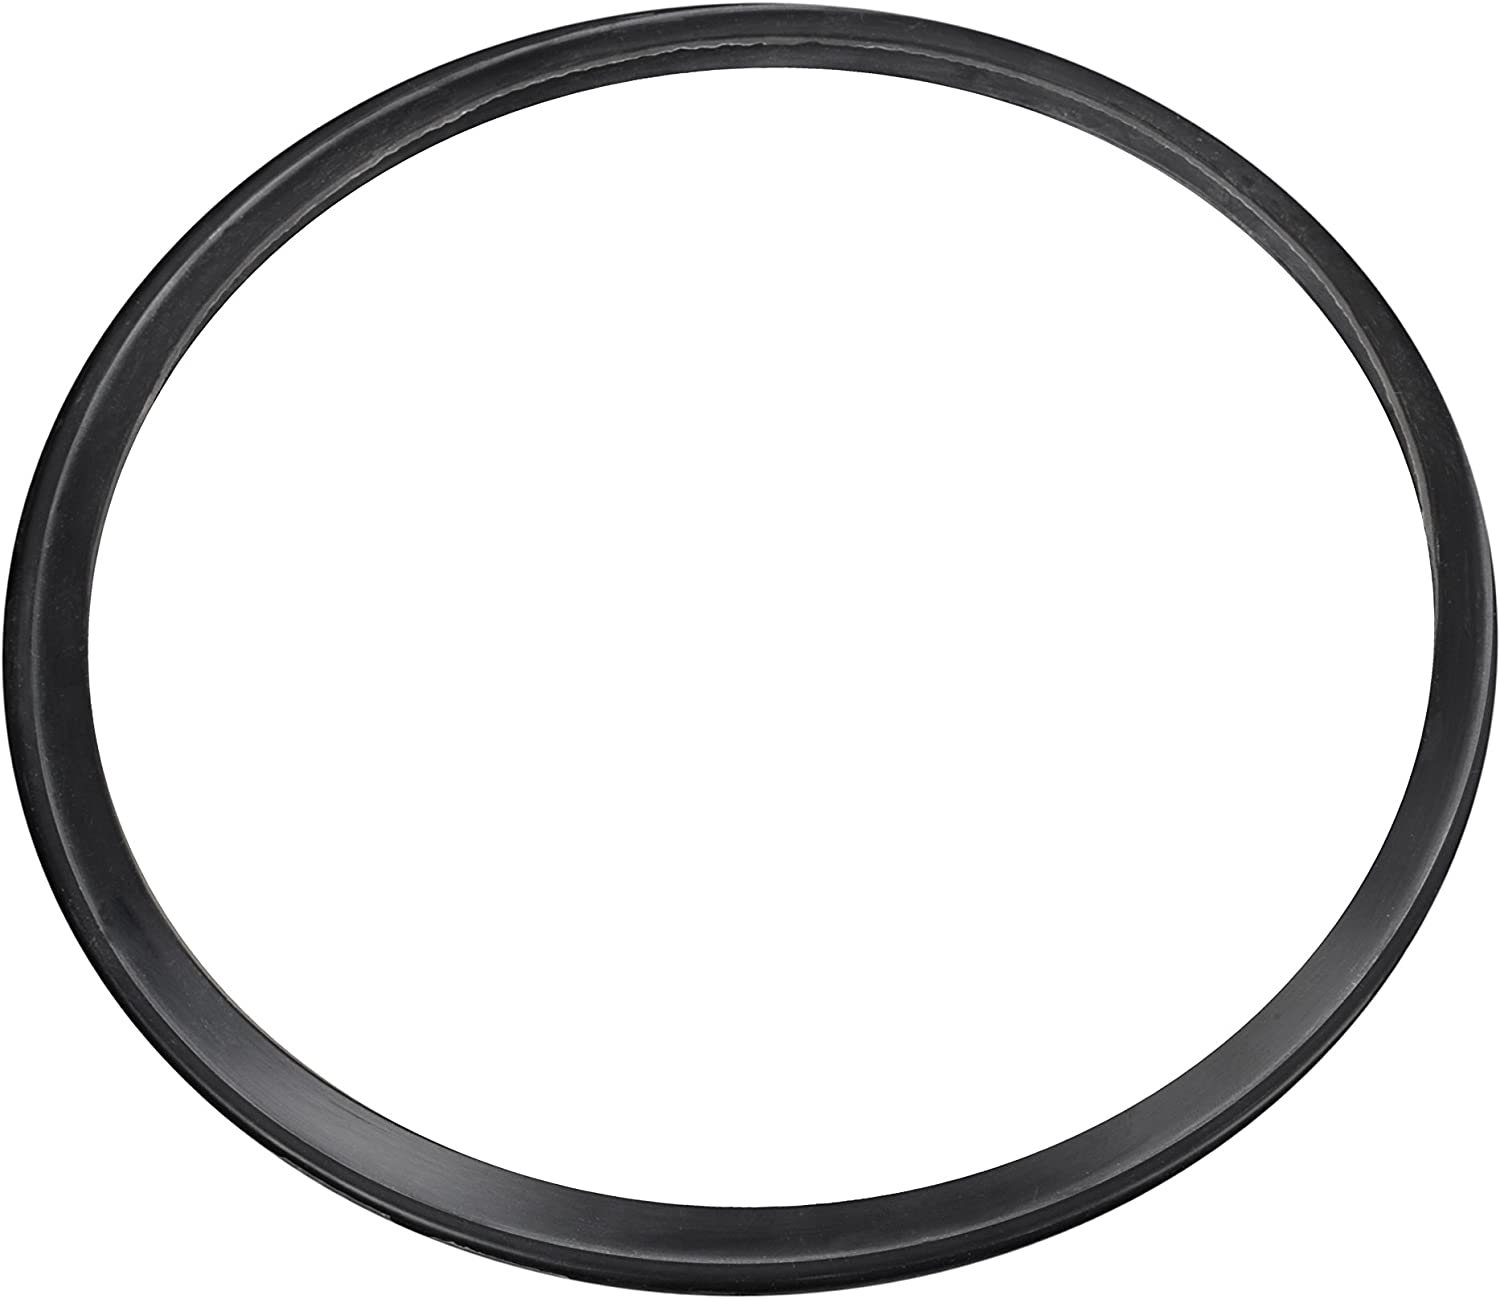 Tefal x1010008 Gasket for Clipso Minut Stainless Steel Multi-Coloured 40 x 23 x 21 cm